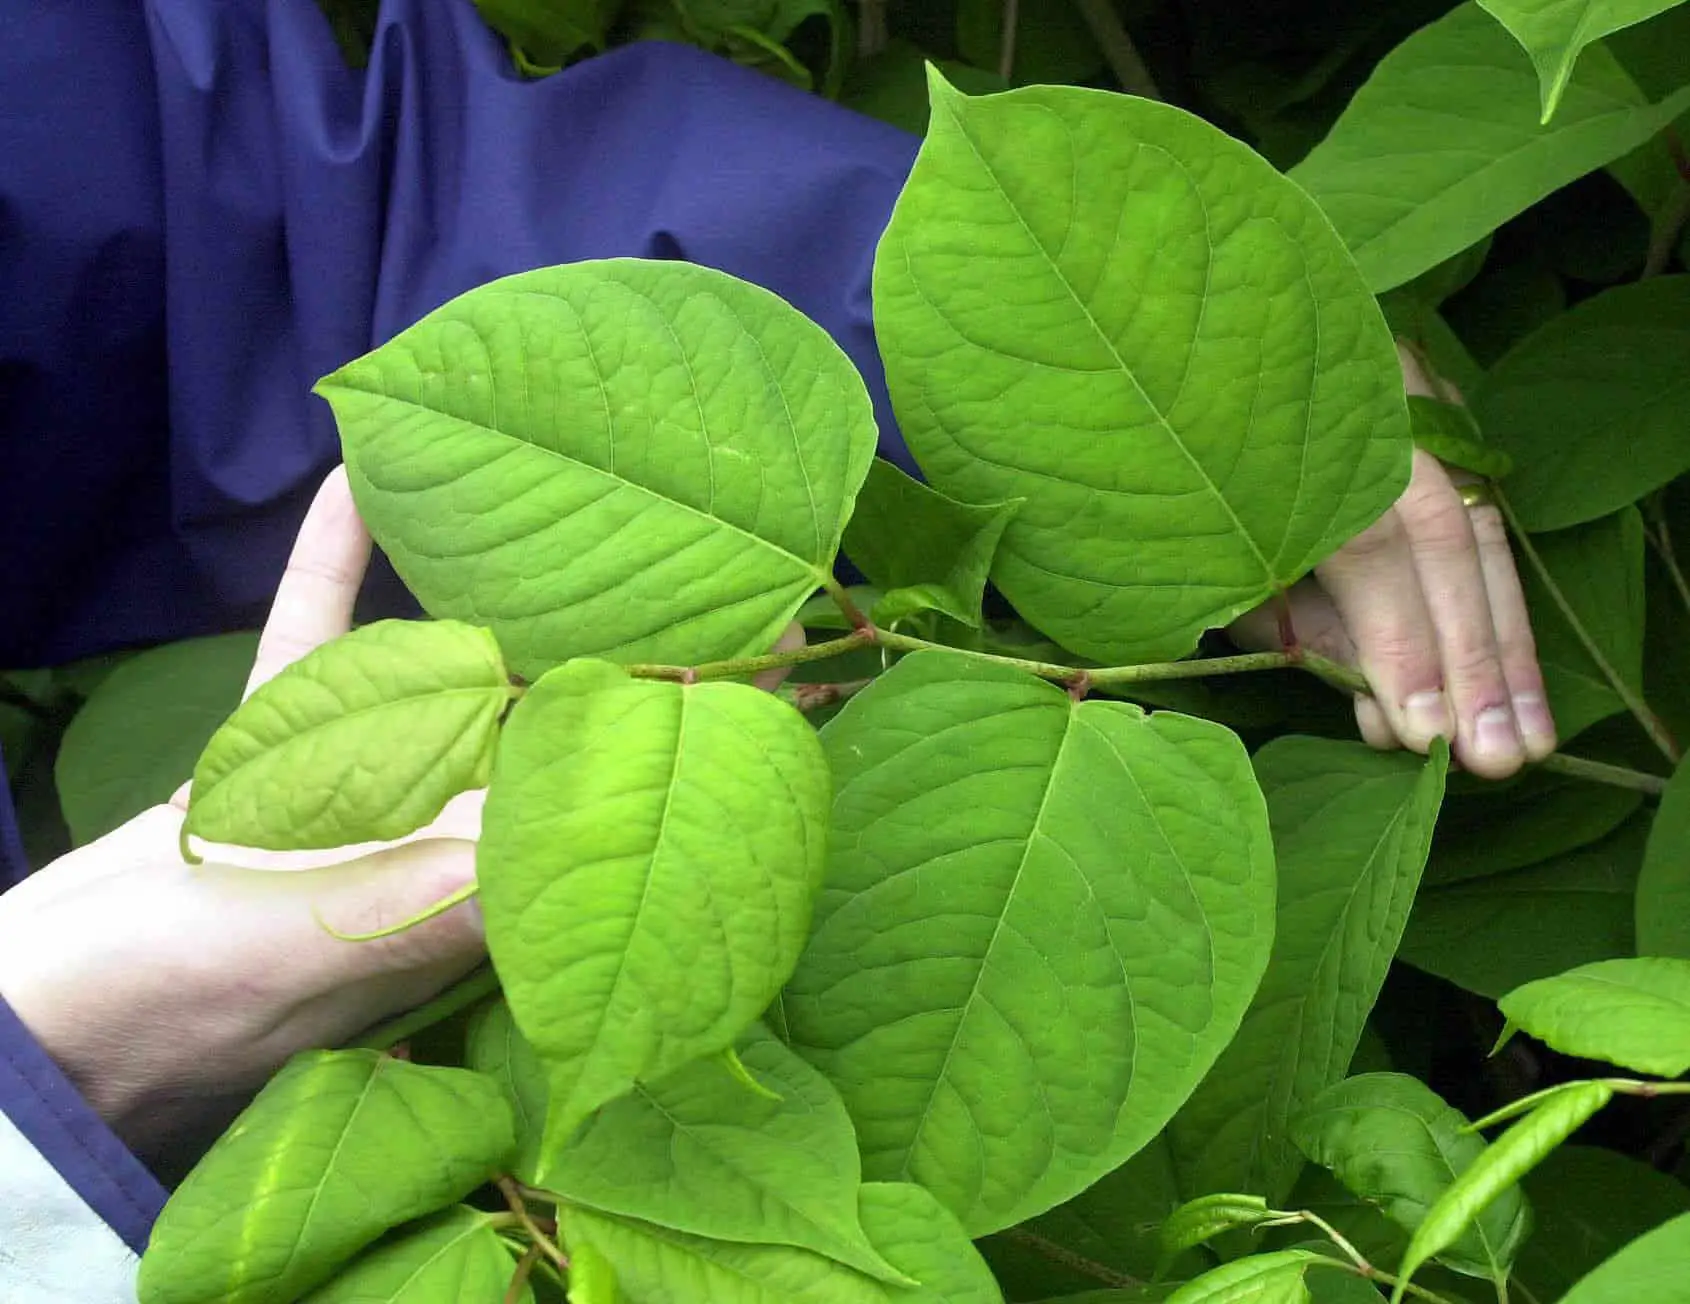 Can You Eat Japanese Knotweed?